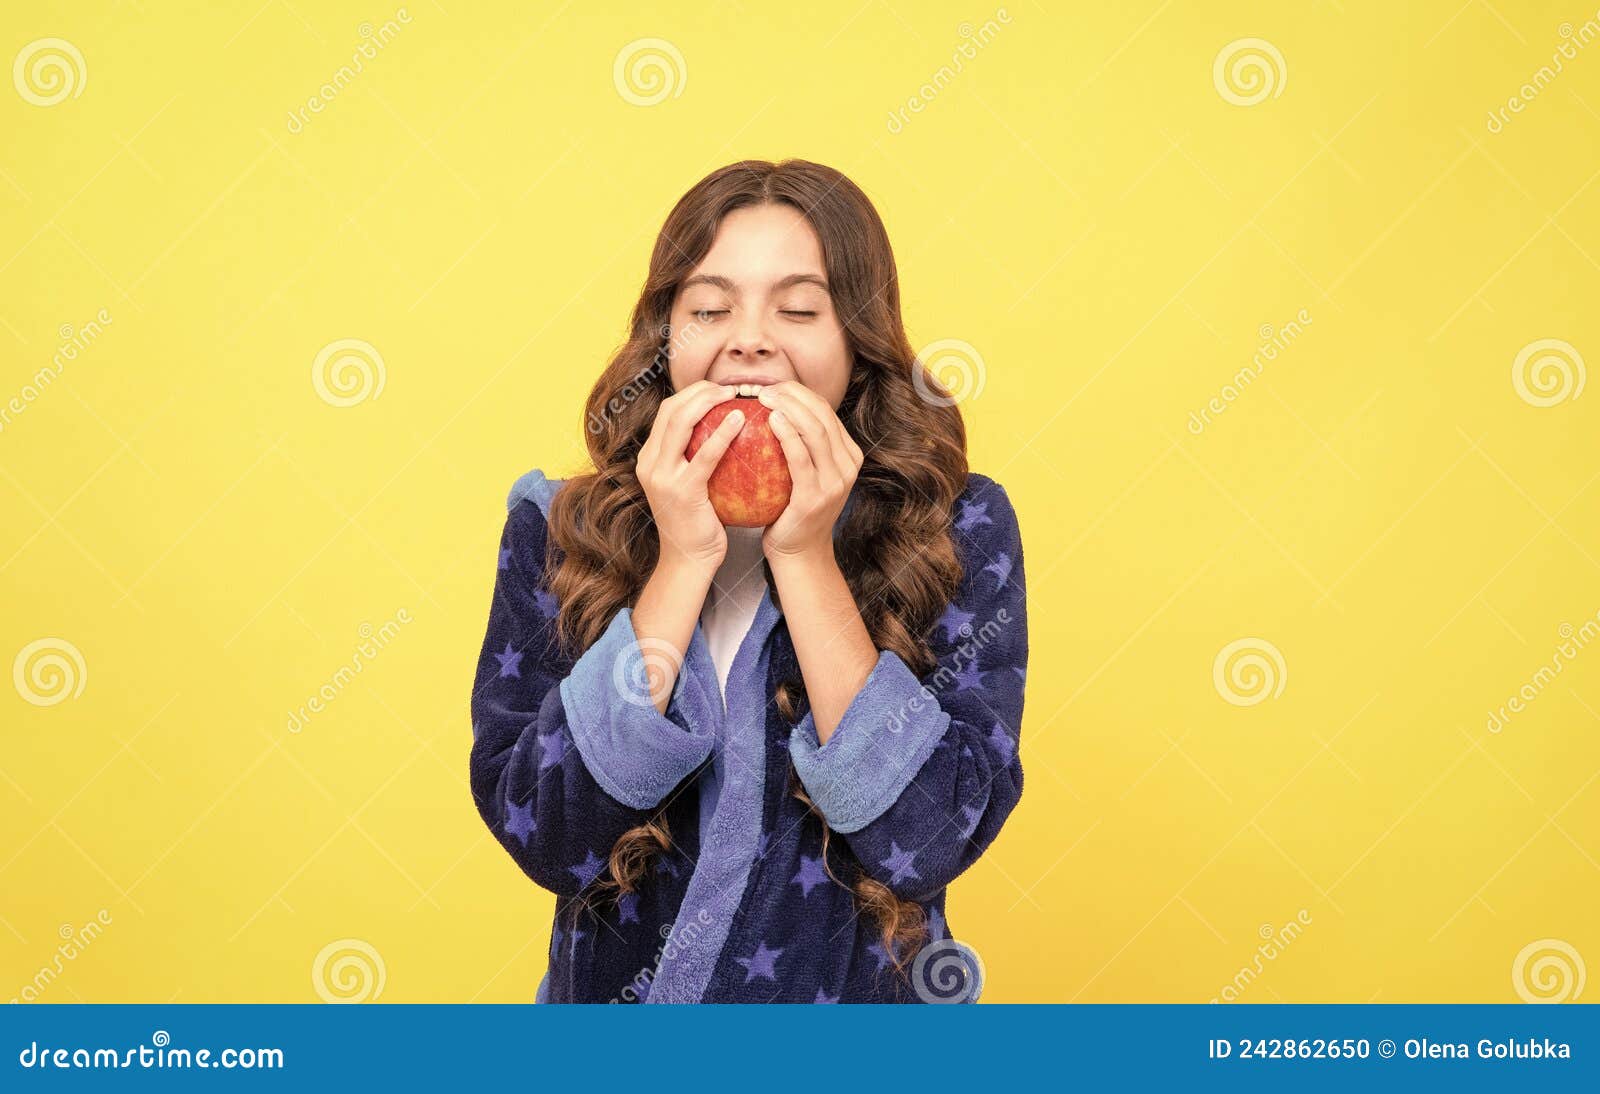 Jajama And Pota Xxx Video - So Tasty and Juicy. Excited Child in Pajama Eating Apple. Morning Breakfast  with Vitamin Stock Photo - Image of diet, dentist: 242862650